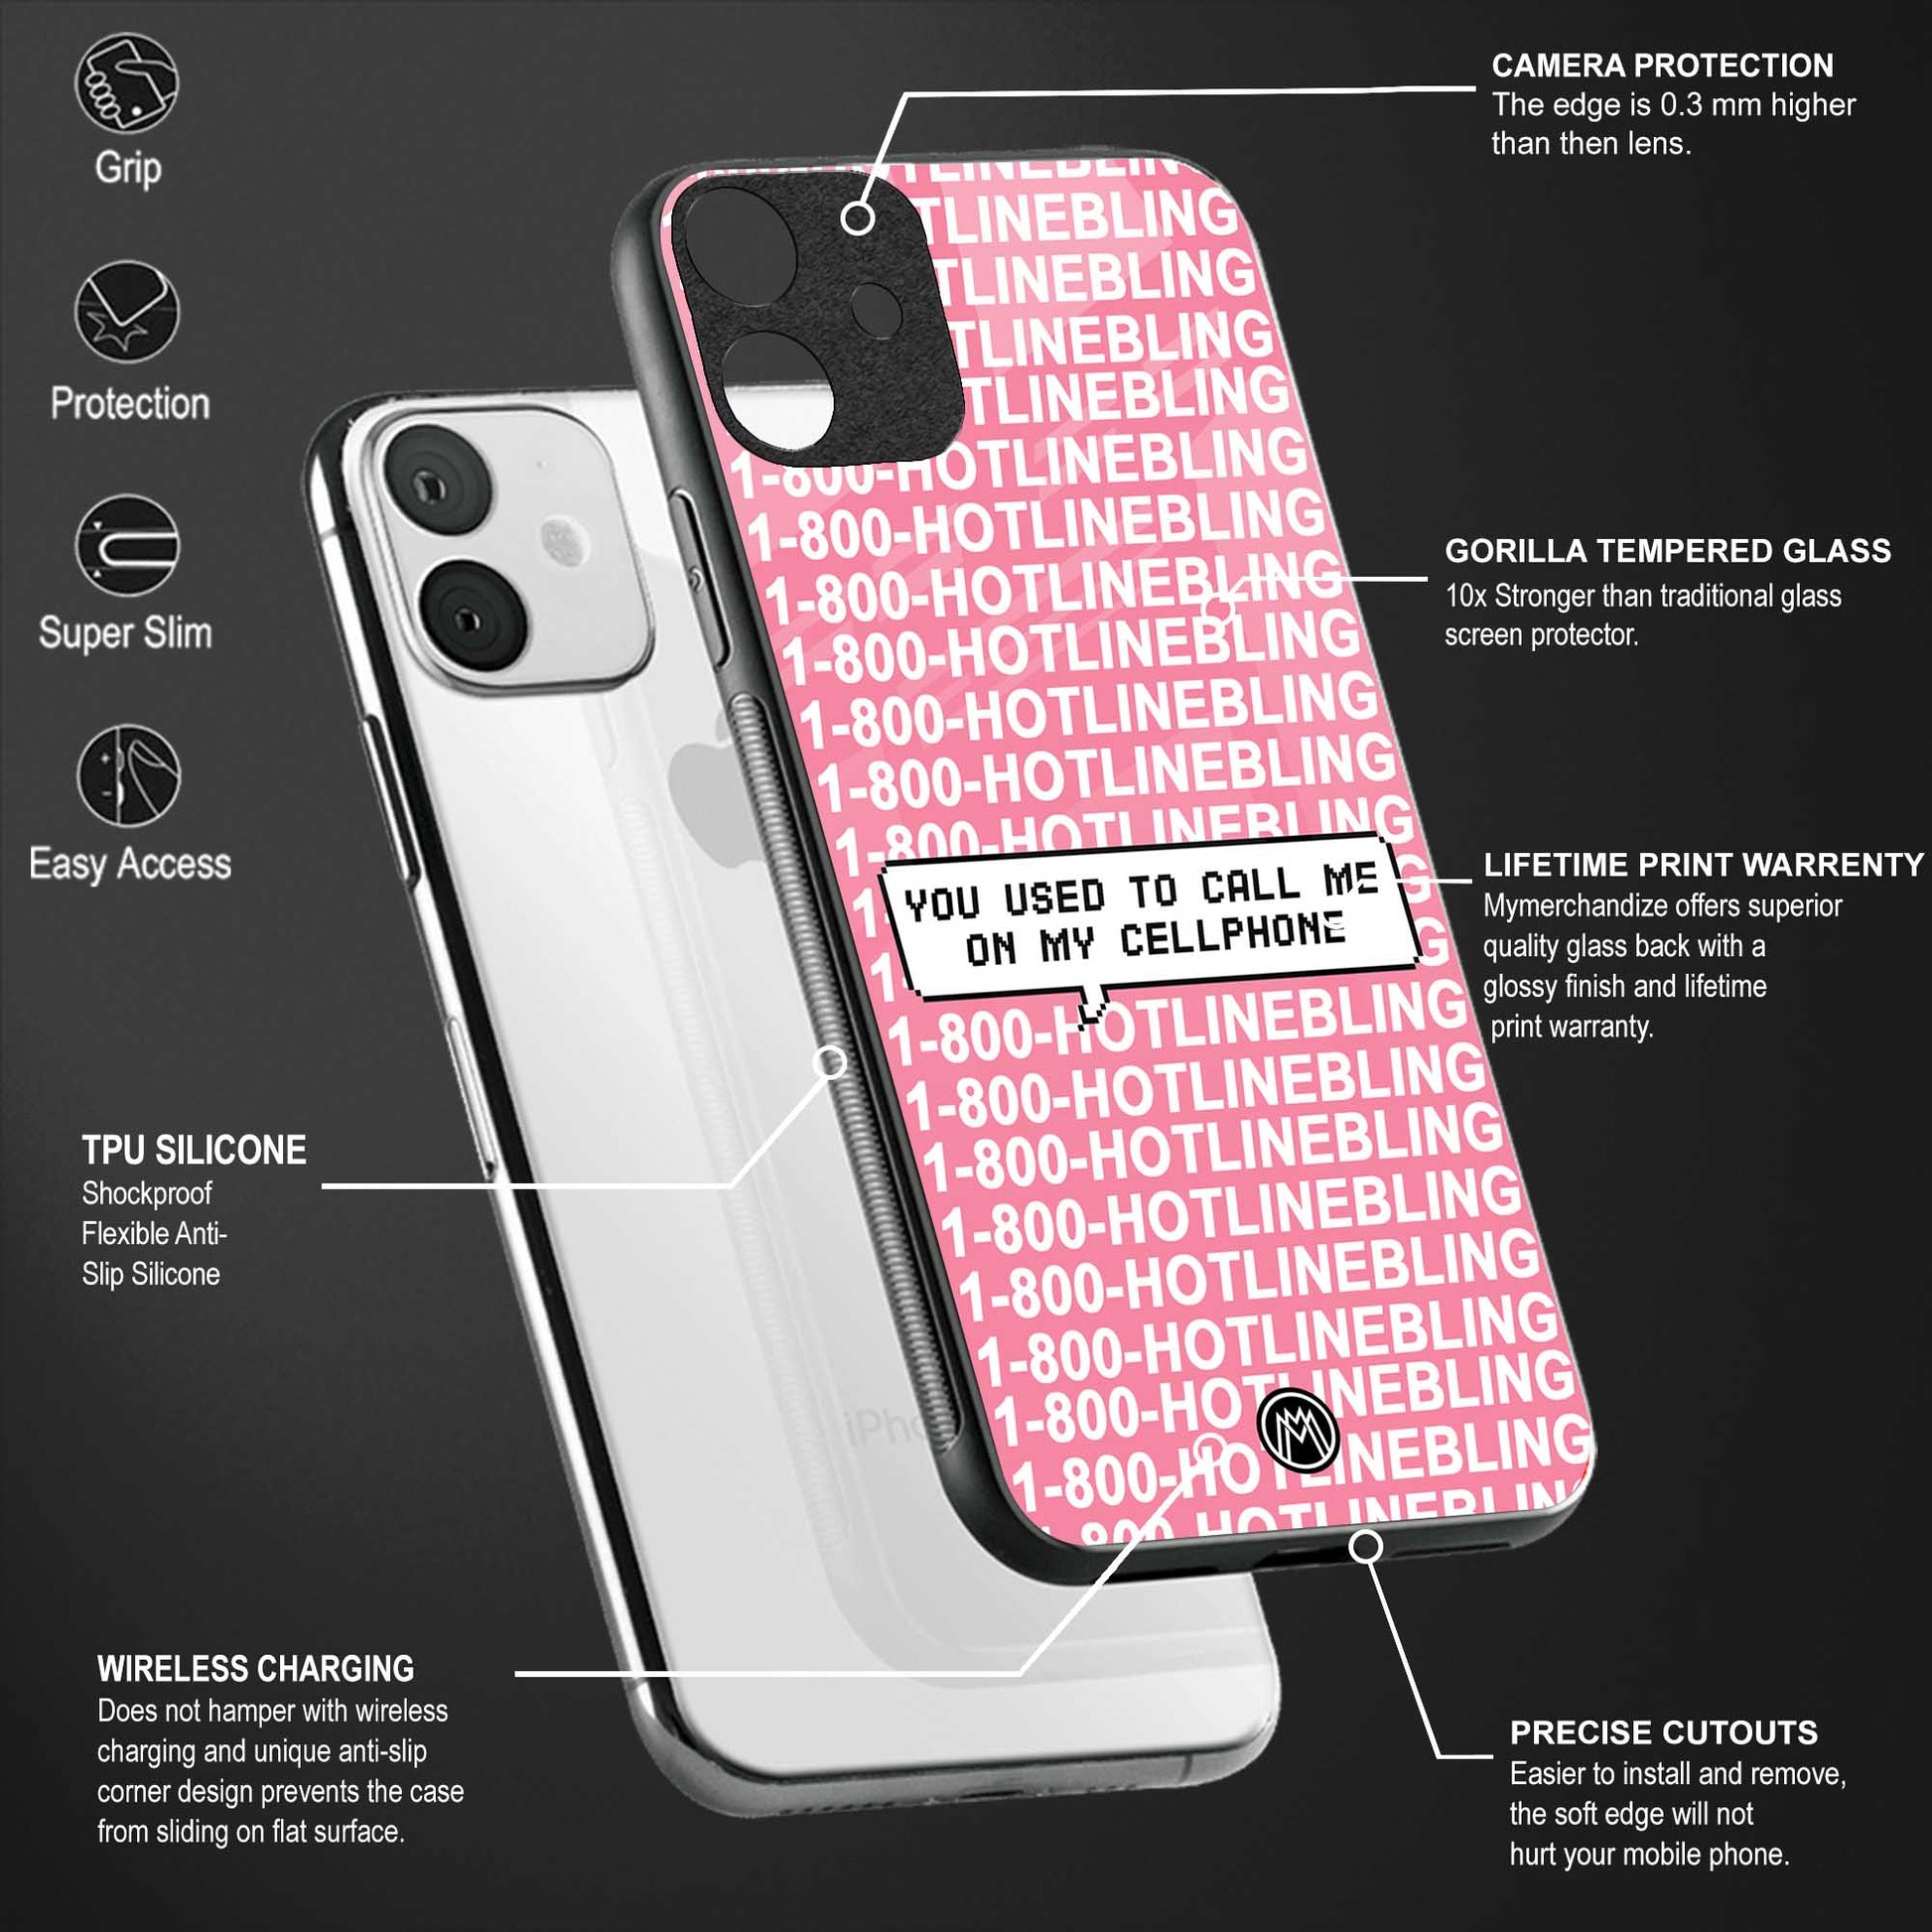 1800 hotline bling phone cover for redmi 6a 